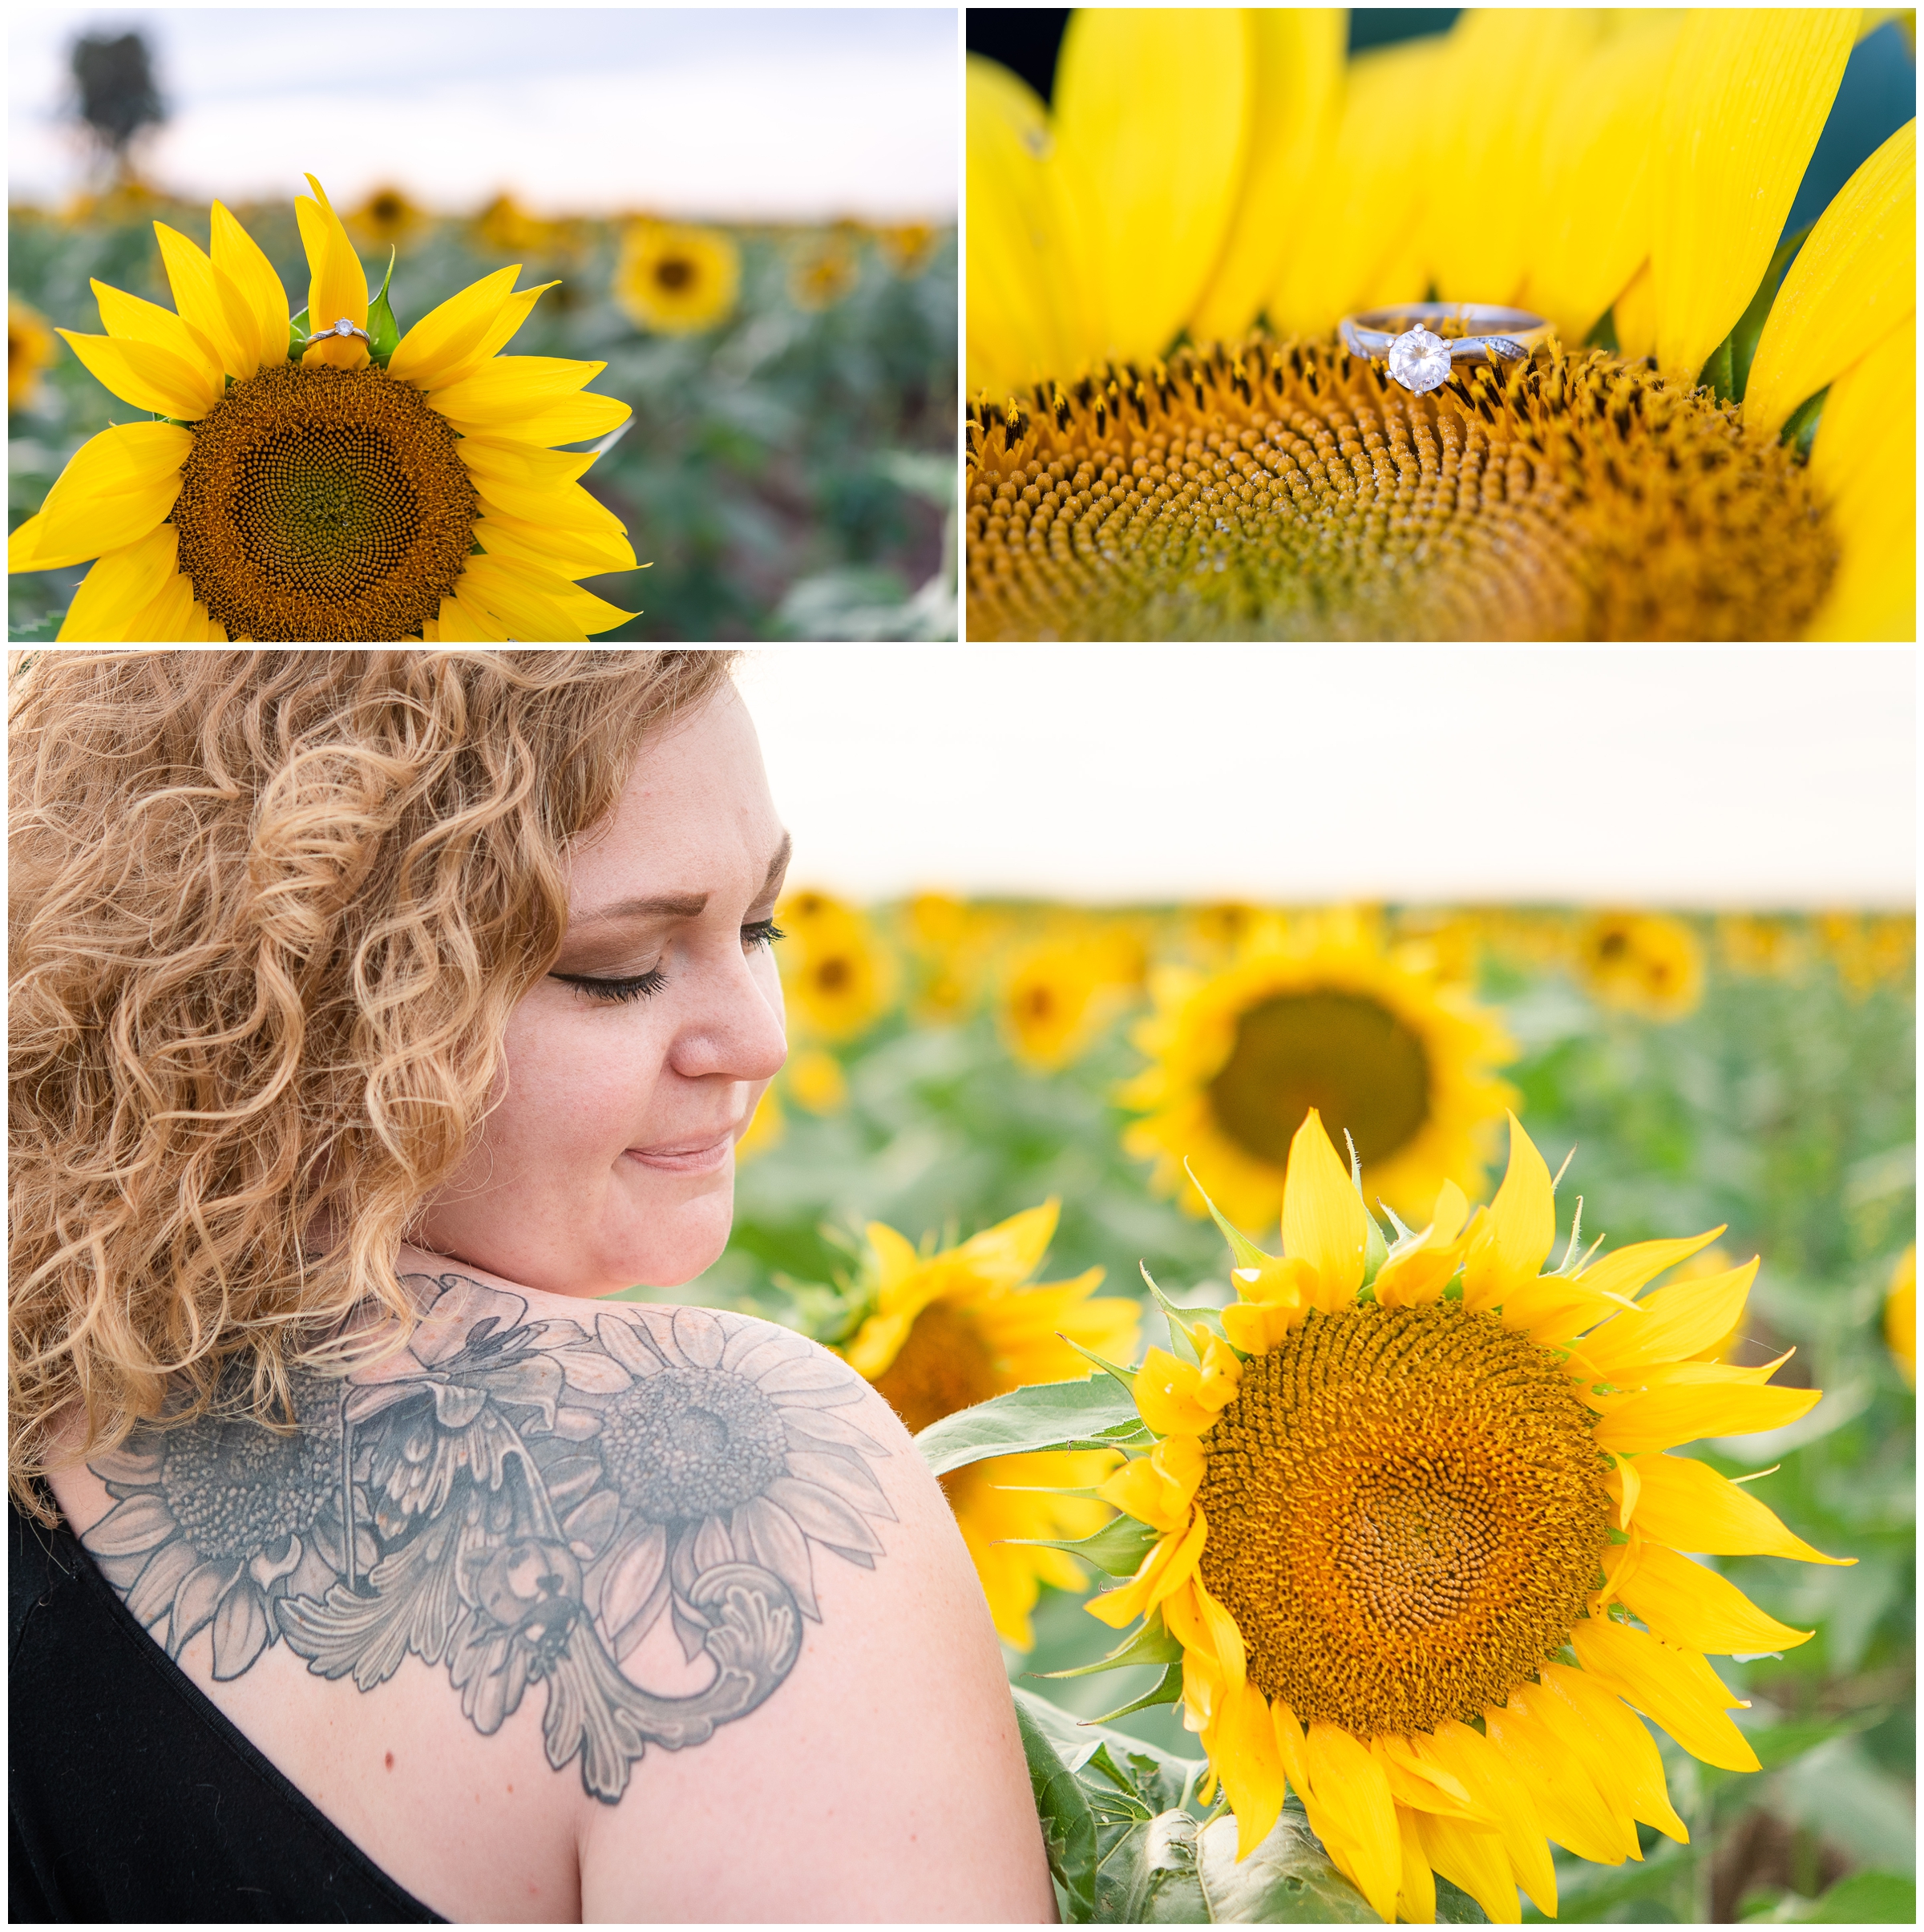 Engagement Ring on Sunflower and sunflower tattoo